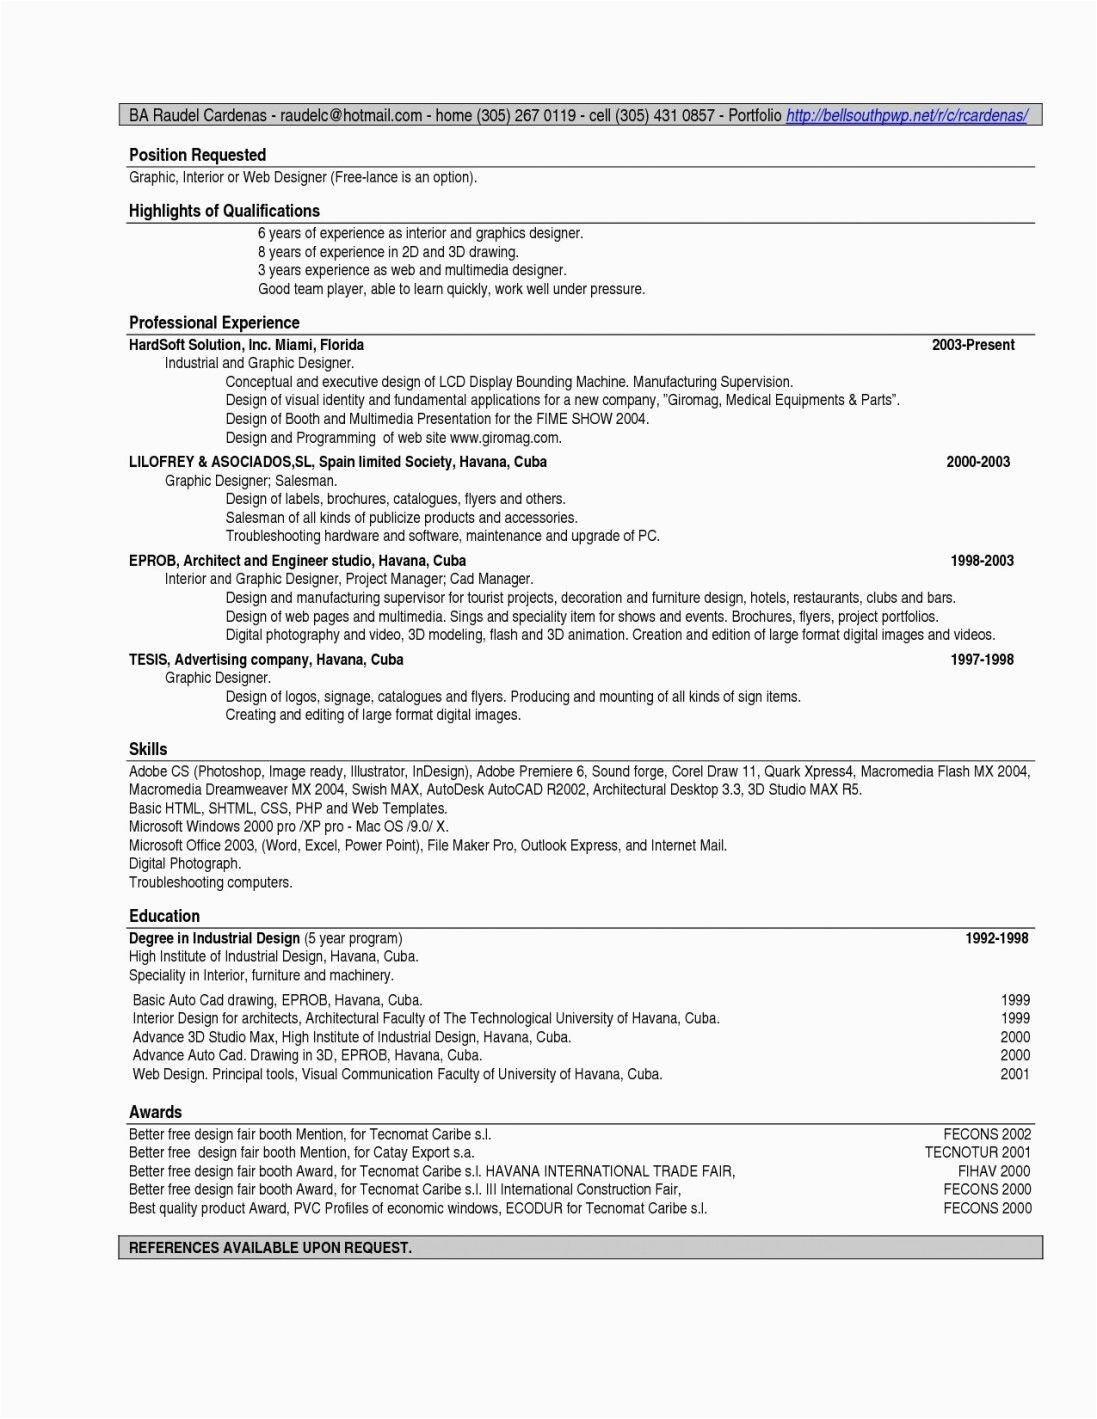 Resume References Available Upon Request Sample Resume Examples References Available Upon Request Resume